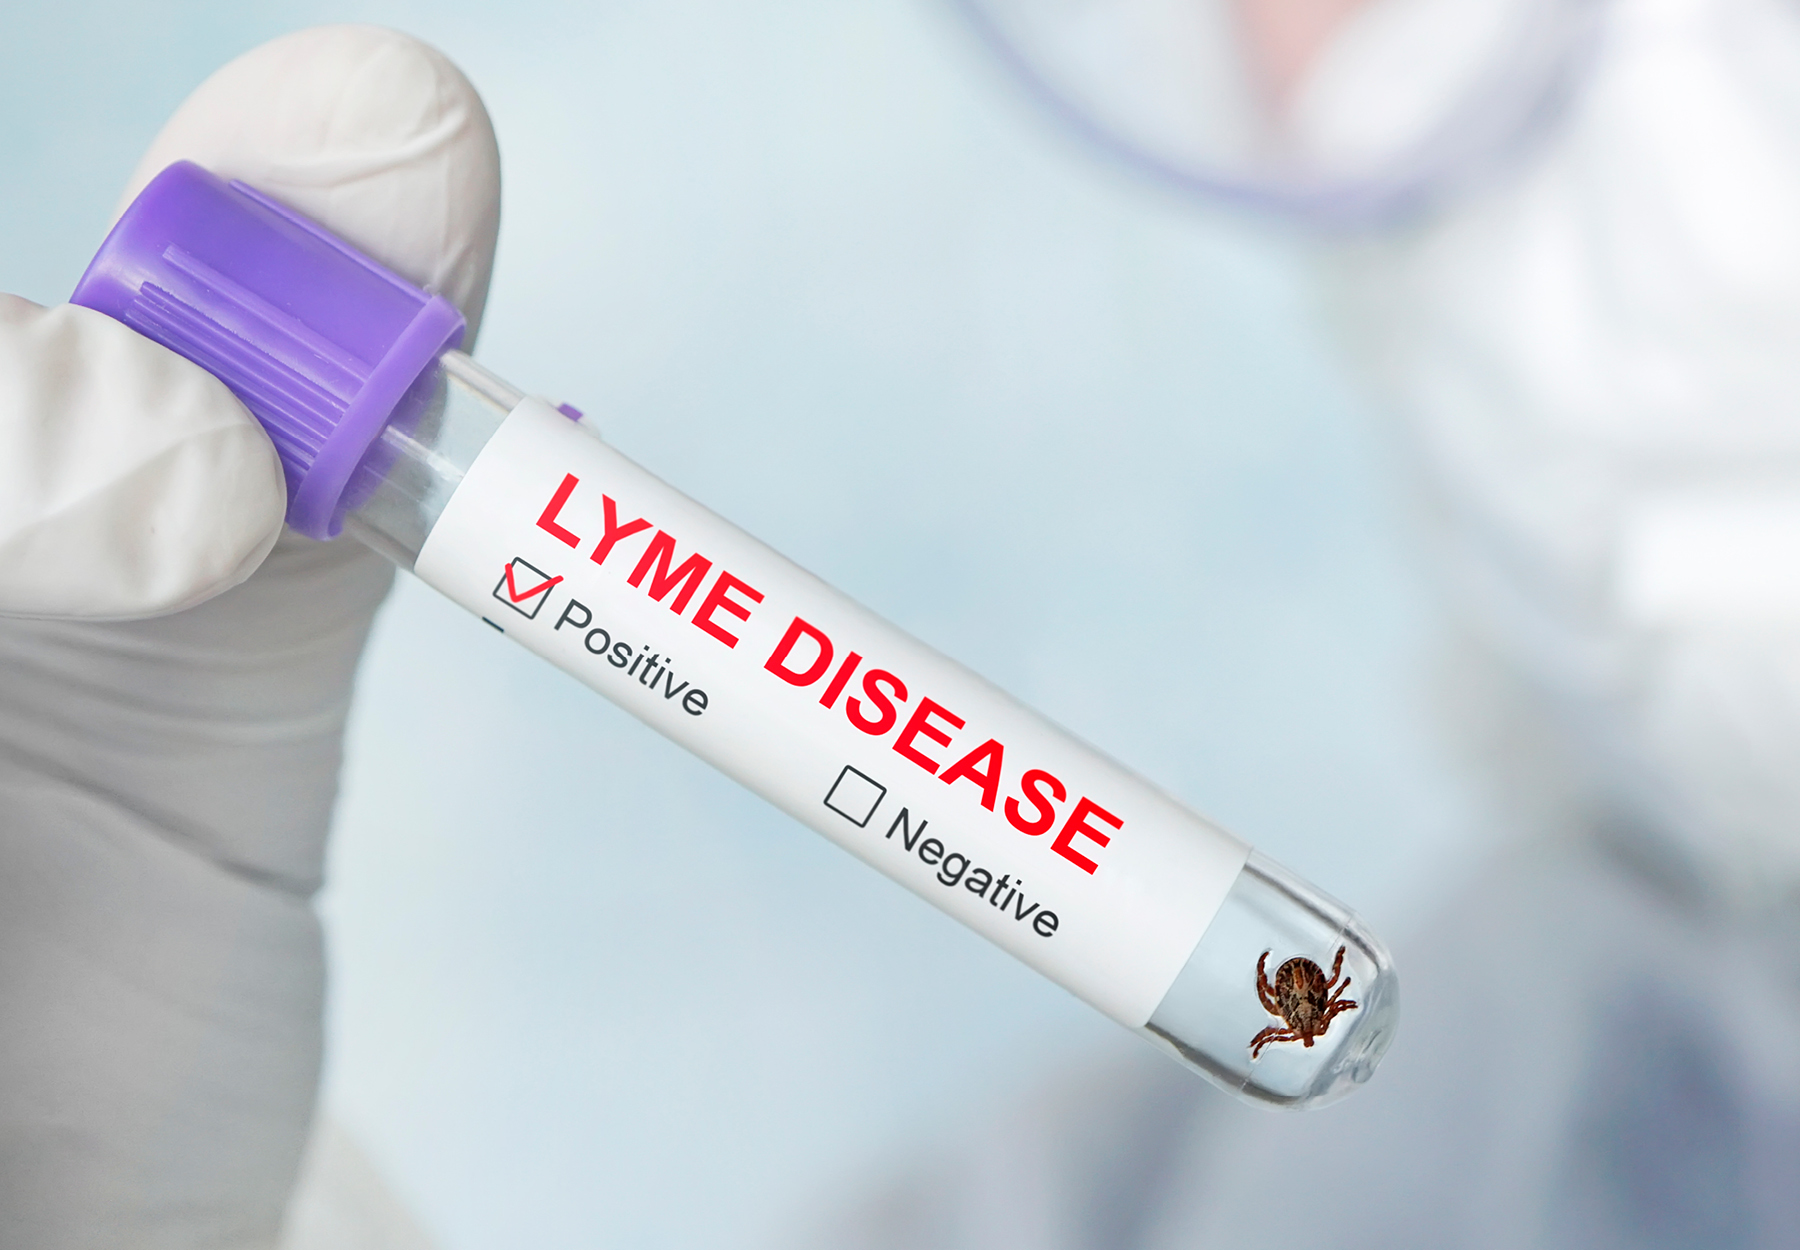 Lyme disease label on a test tube in the hands of a laboratory assistant dangerous iStock image